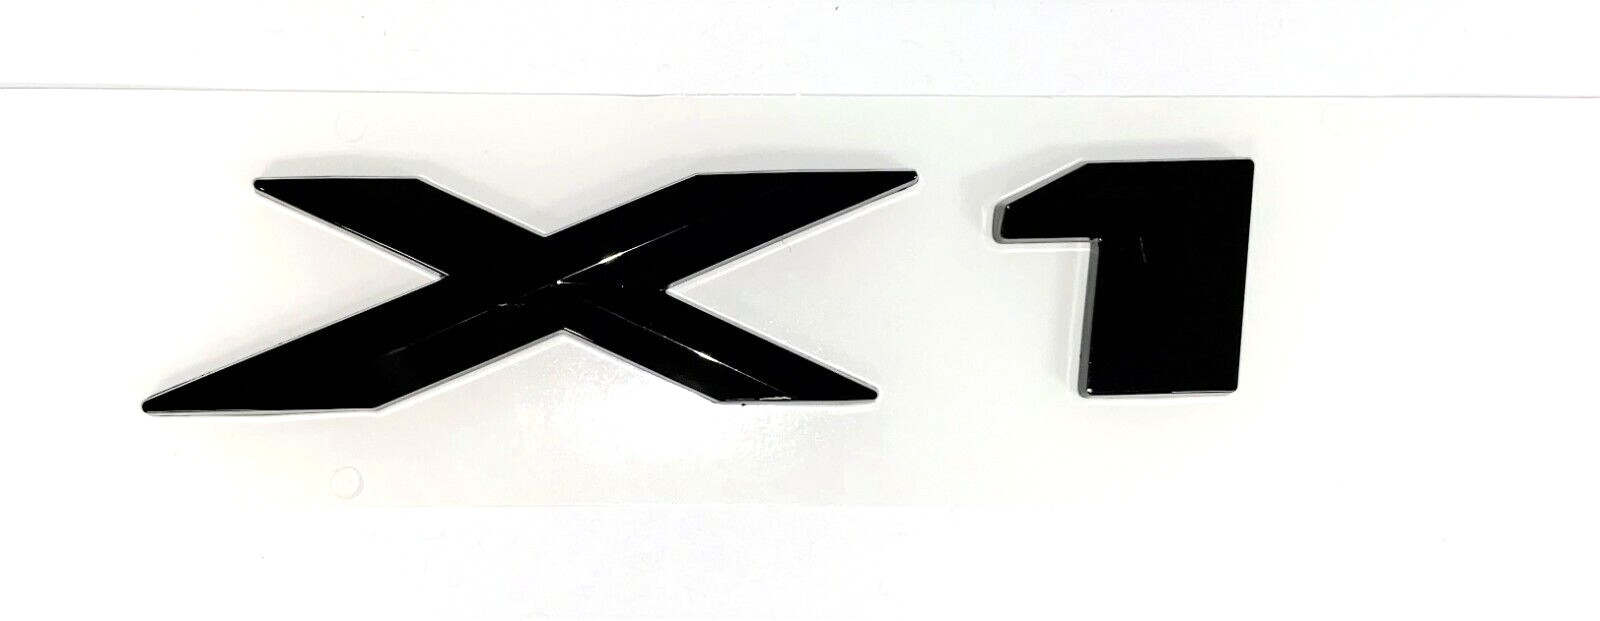 BLACK X1 FIT BMW X-1 REAR TRUNK NAMEPLATE EMBLEM BADGE NUMBERS DECAL NAME